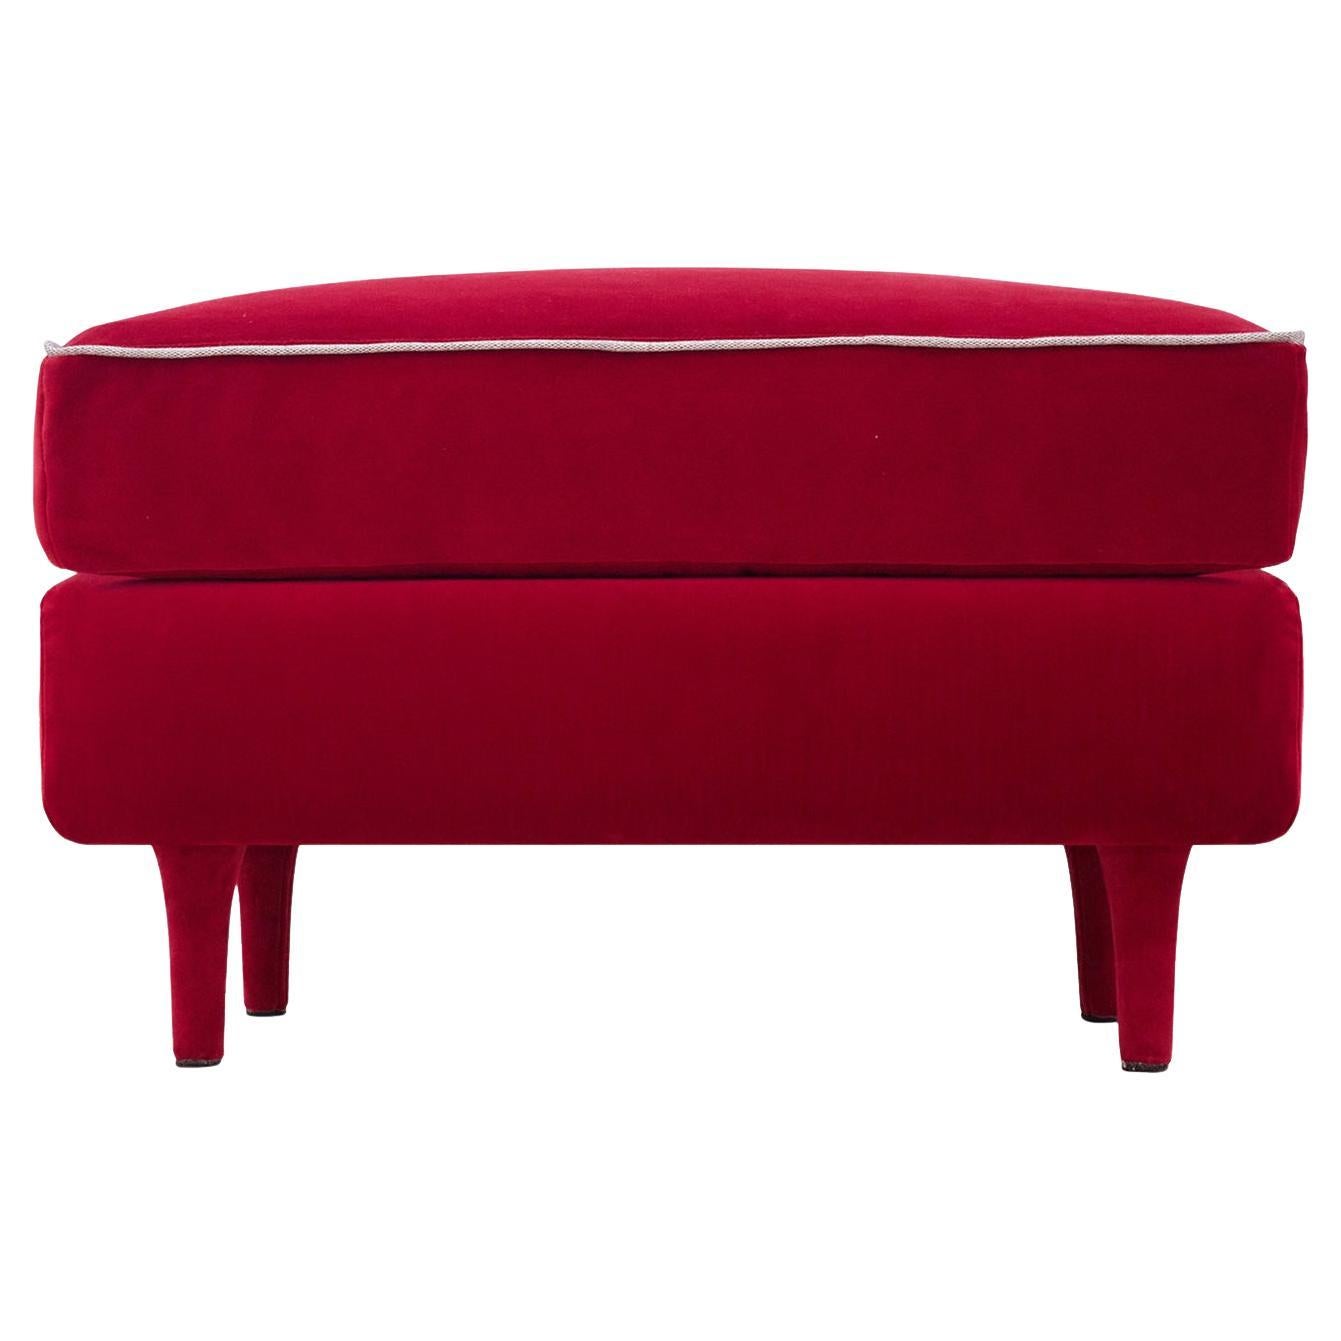 Casquet Ecological Red Passion Velvet Ottoman